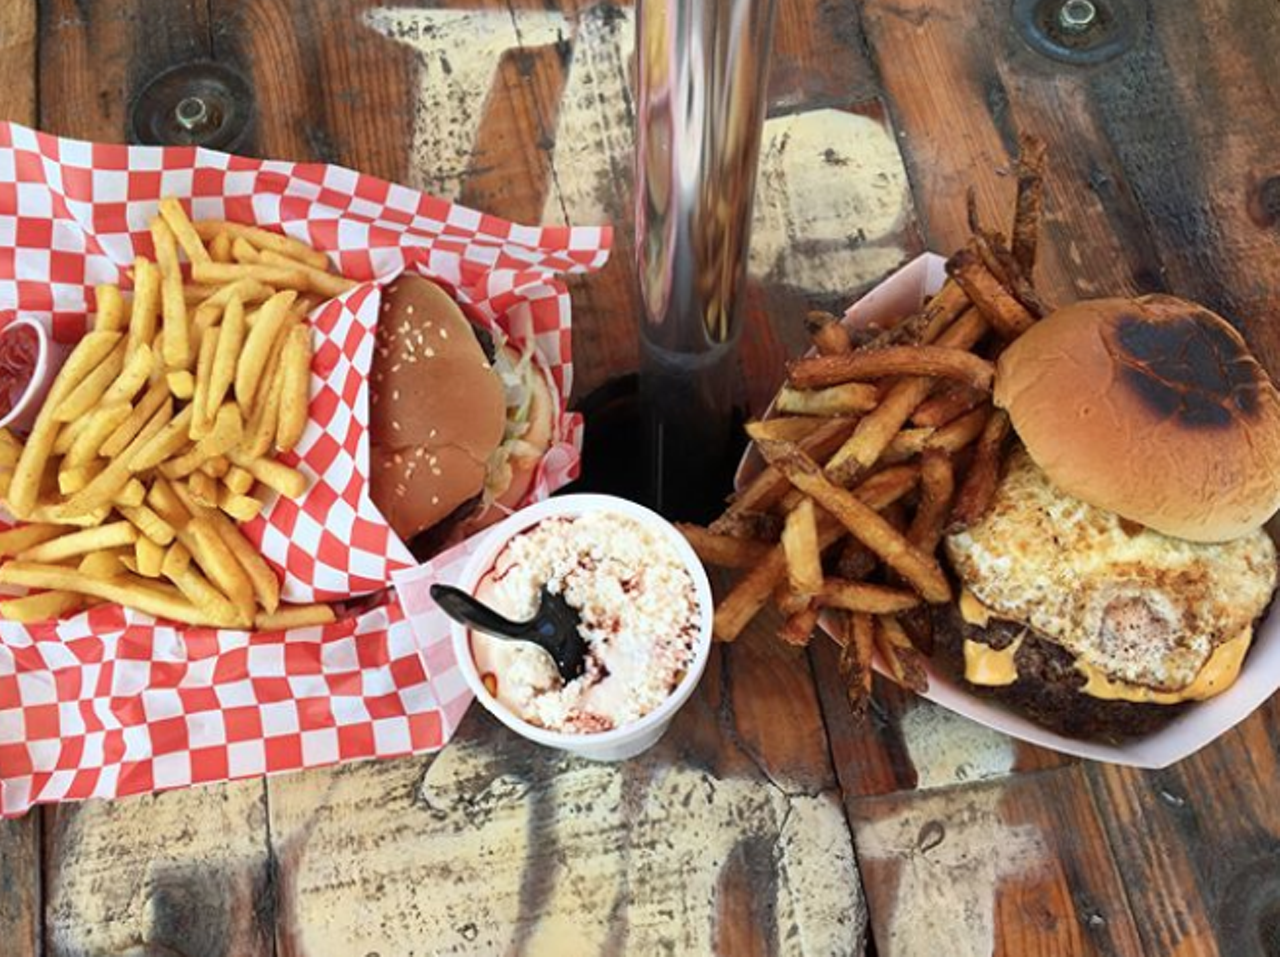 The Point Park & Eats
24188 Boerne Stage Road, (210) 251-3380, parkatthepoint.com
Denise Aguirre, mother of four, is also known opening The Point Park & Eats, as well as Dignowity Meats on the city’s Eastside. 
Photo via Instagram / ravennakblake